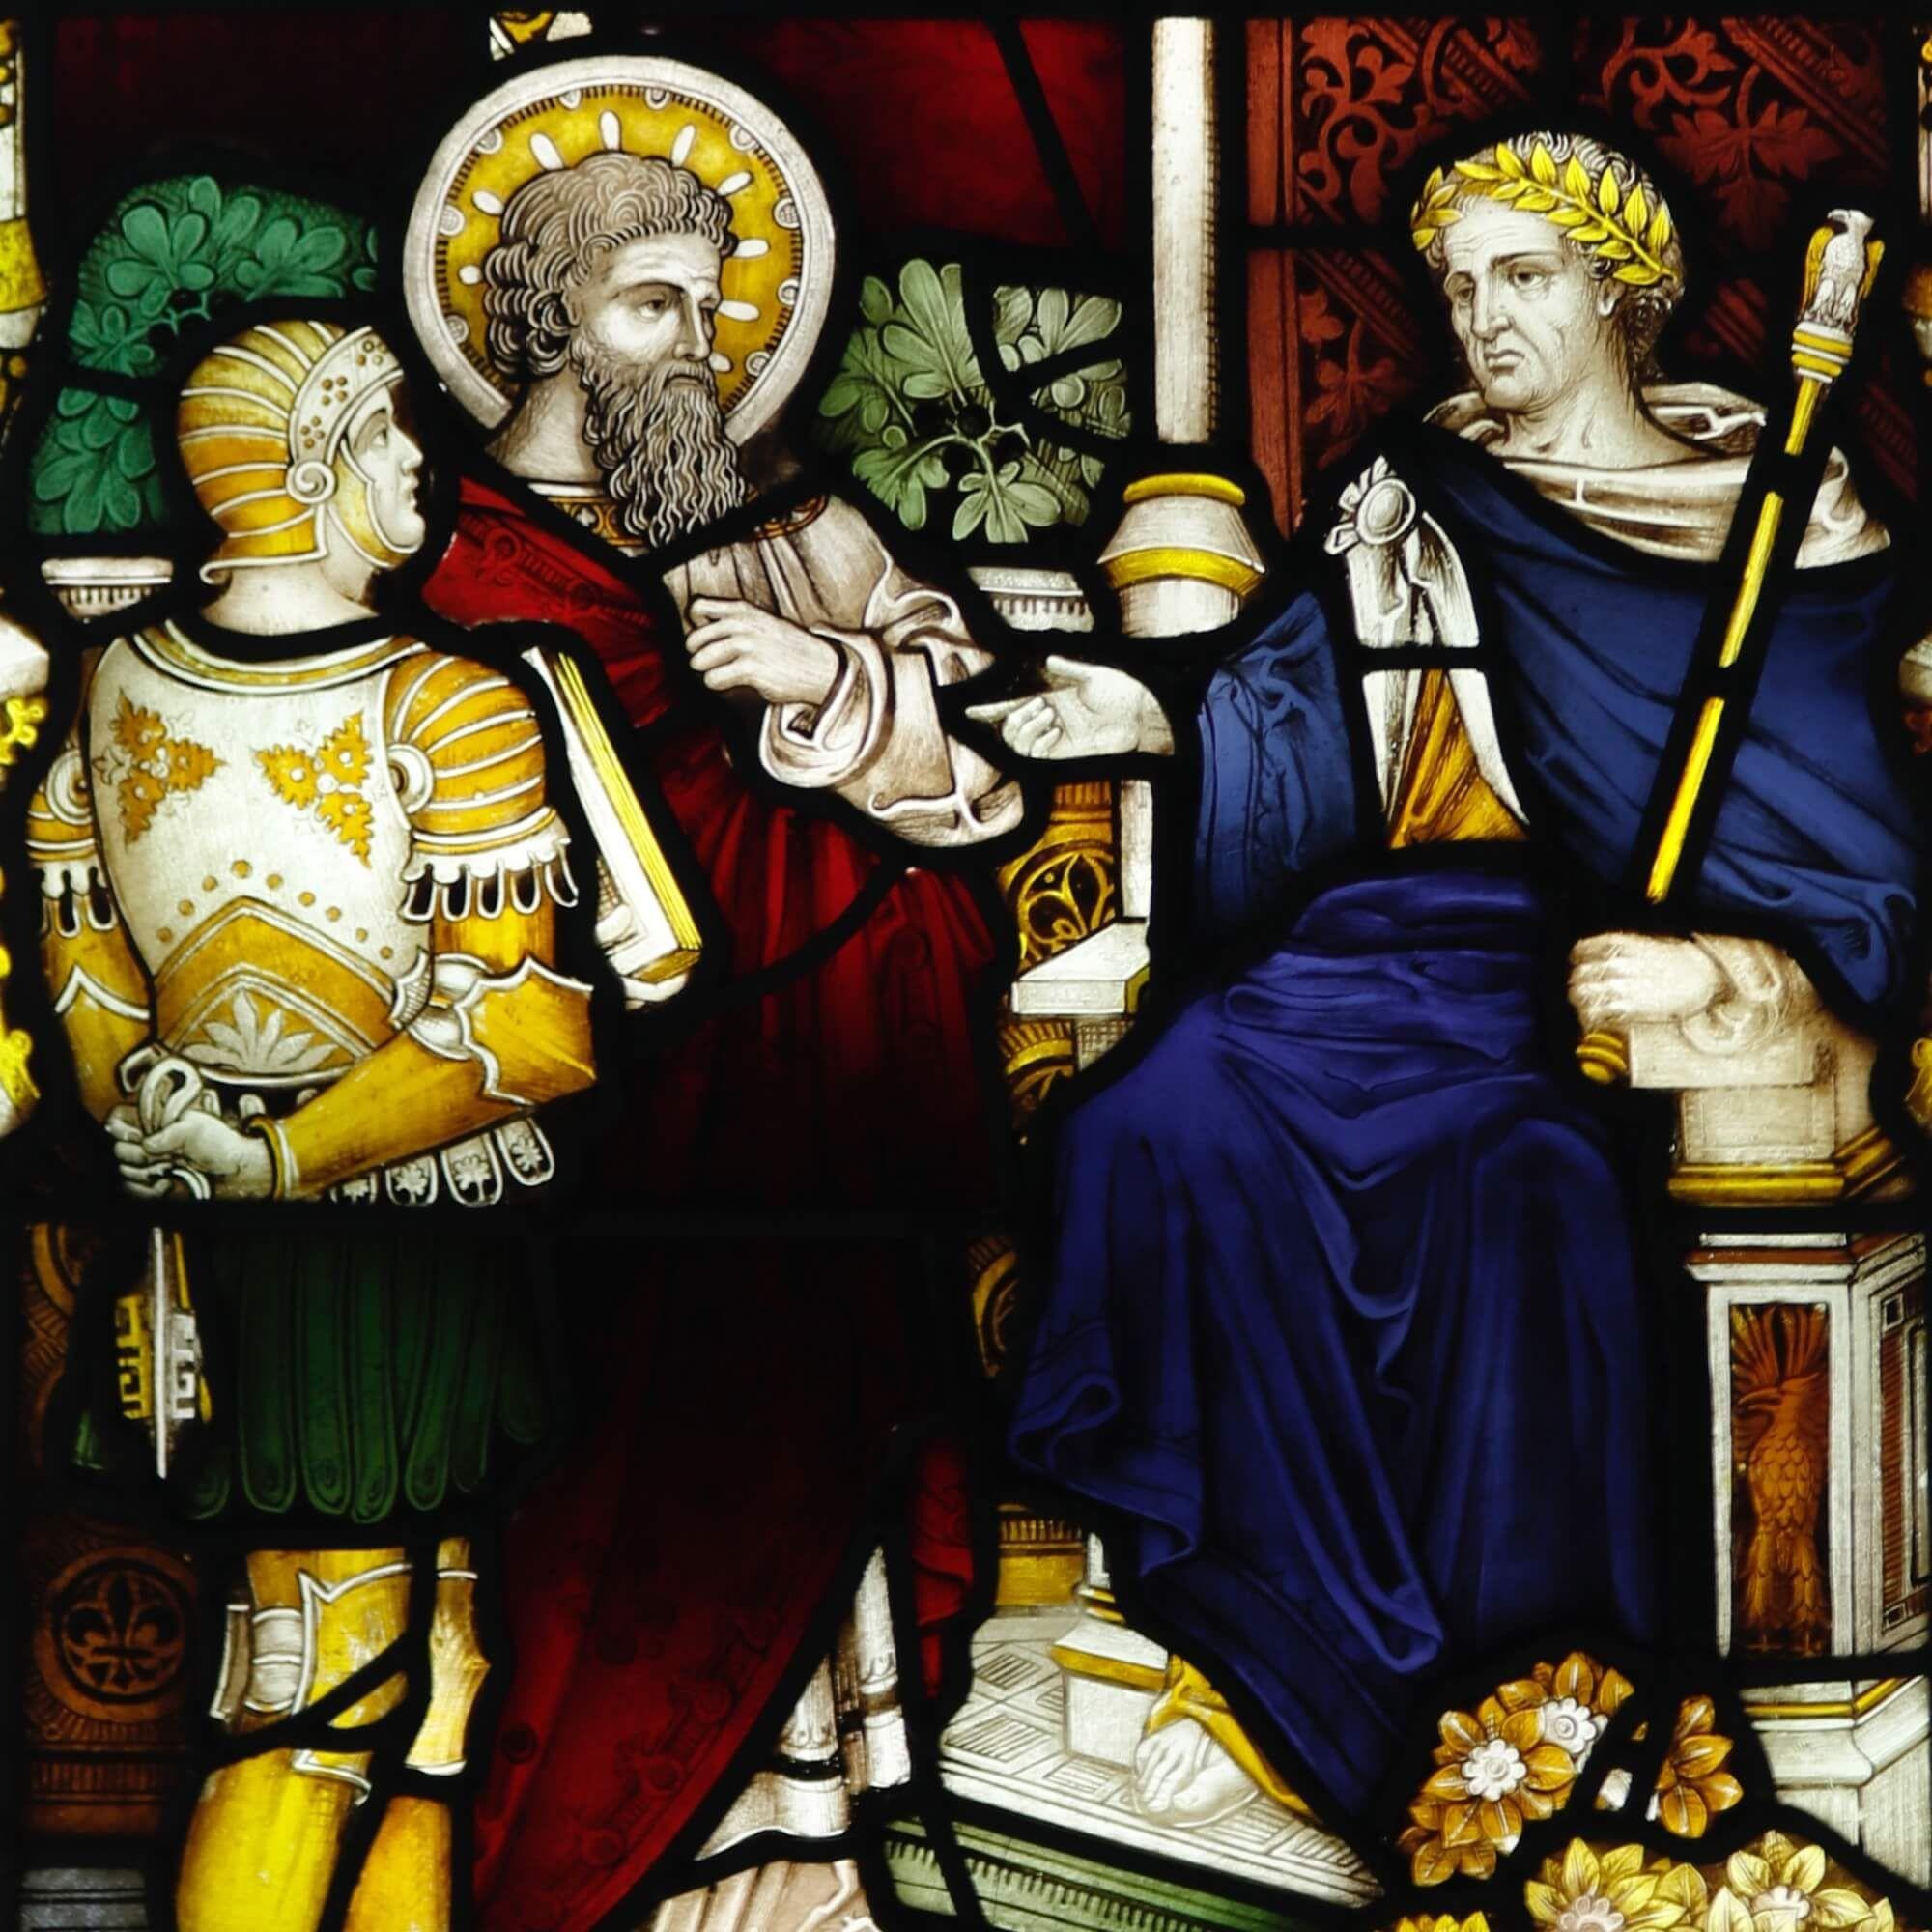 A good condition and richly toned Roman style stained glass window circa 1890. This spectacular 19th century stained glass panel depicts a solider and a religious, saint-like figure standing before a Roman Emperor, possibly of the Imperial era when